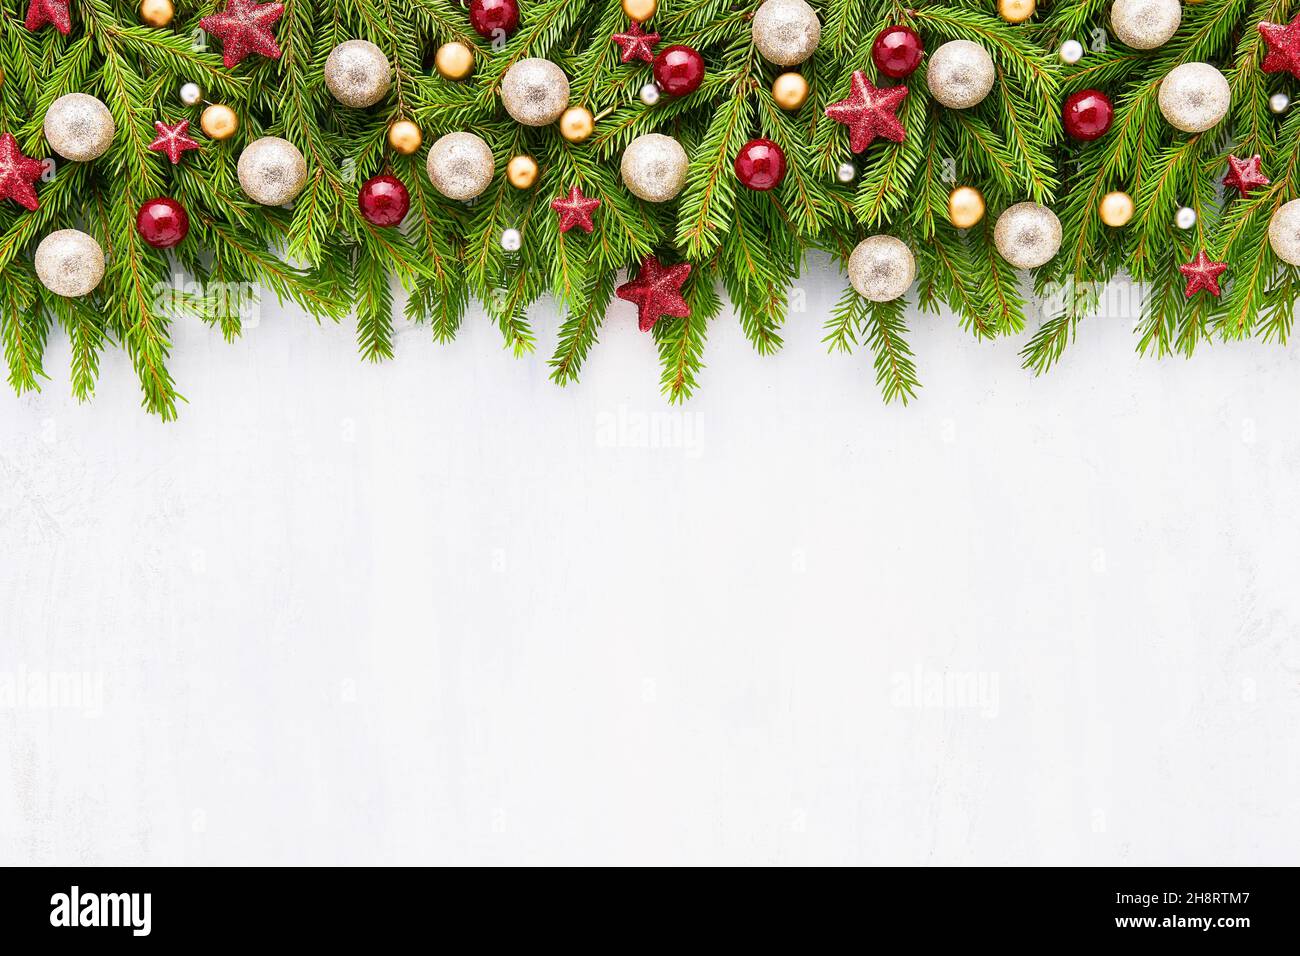 Christmas background. Christmas decoration on fir tree branches on a light background with copy space. Top view, copy space for text. Stock Photo